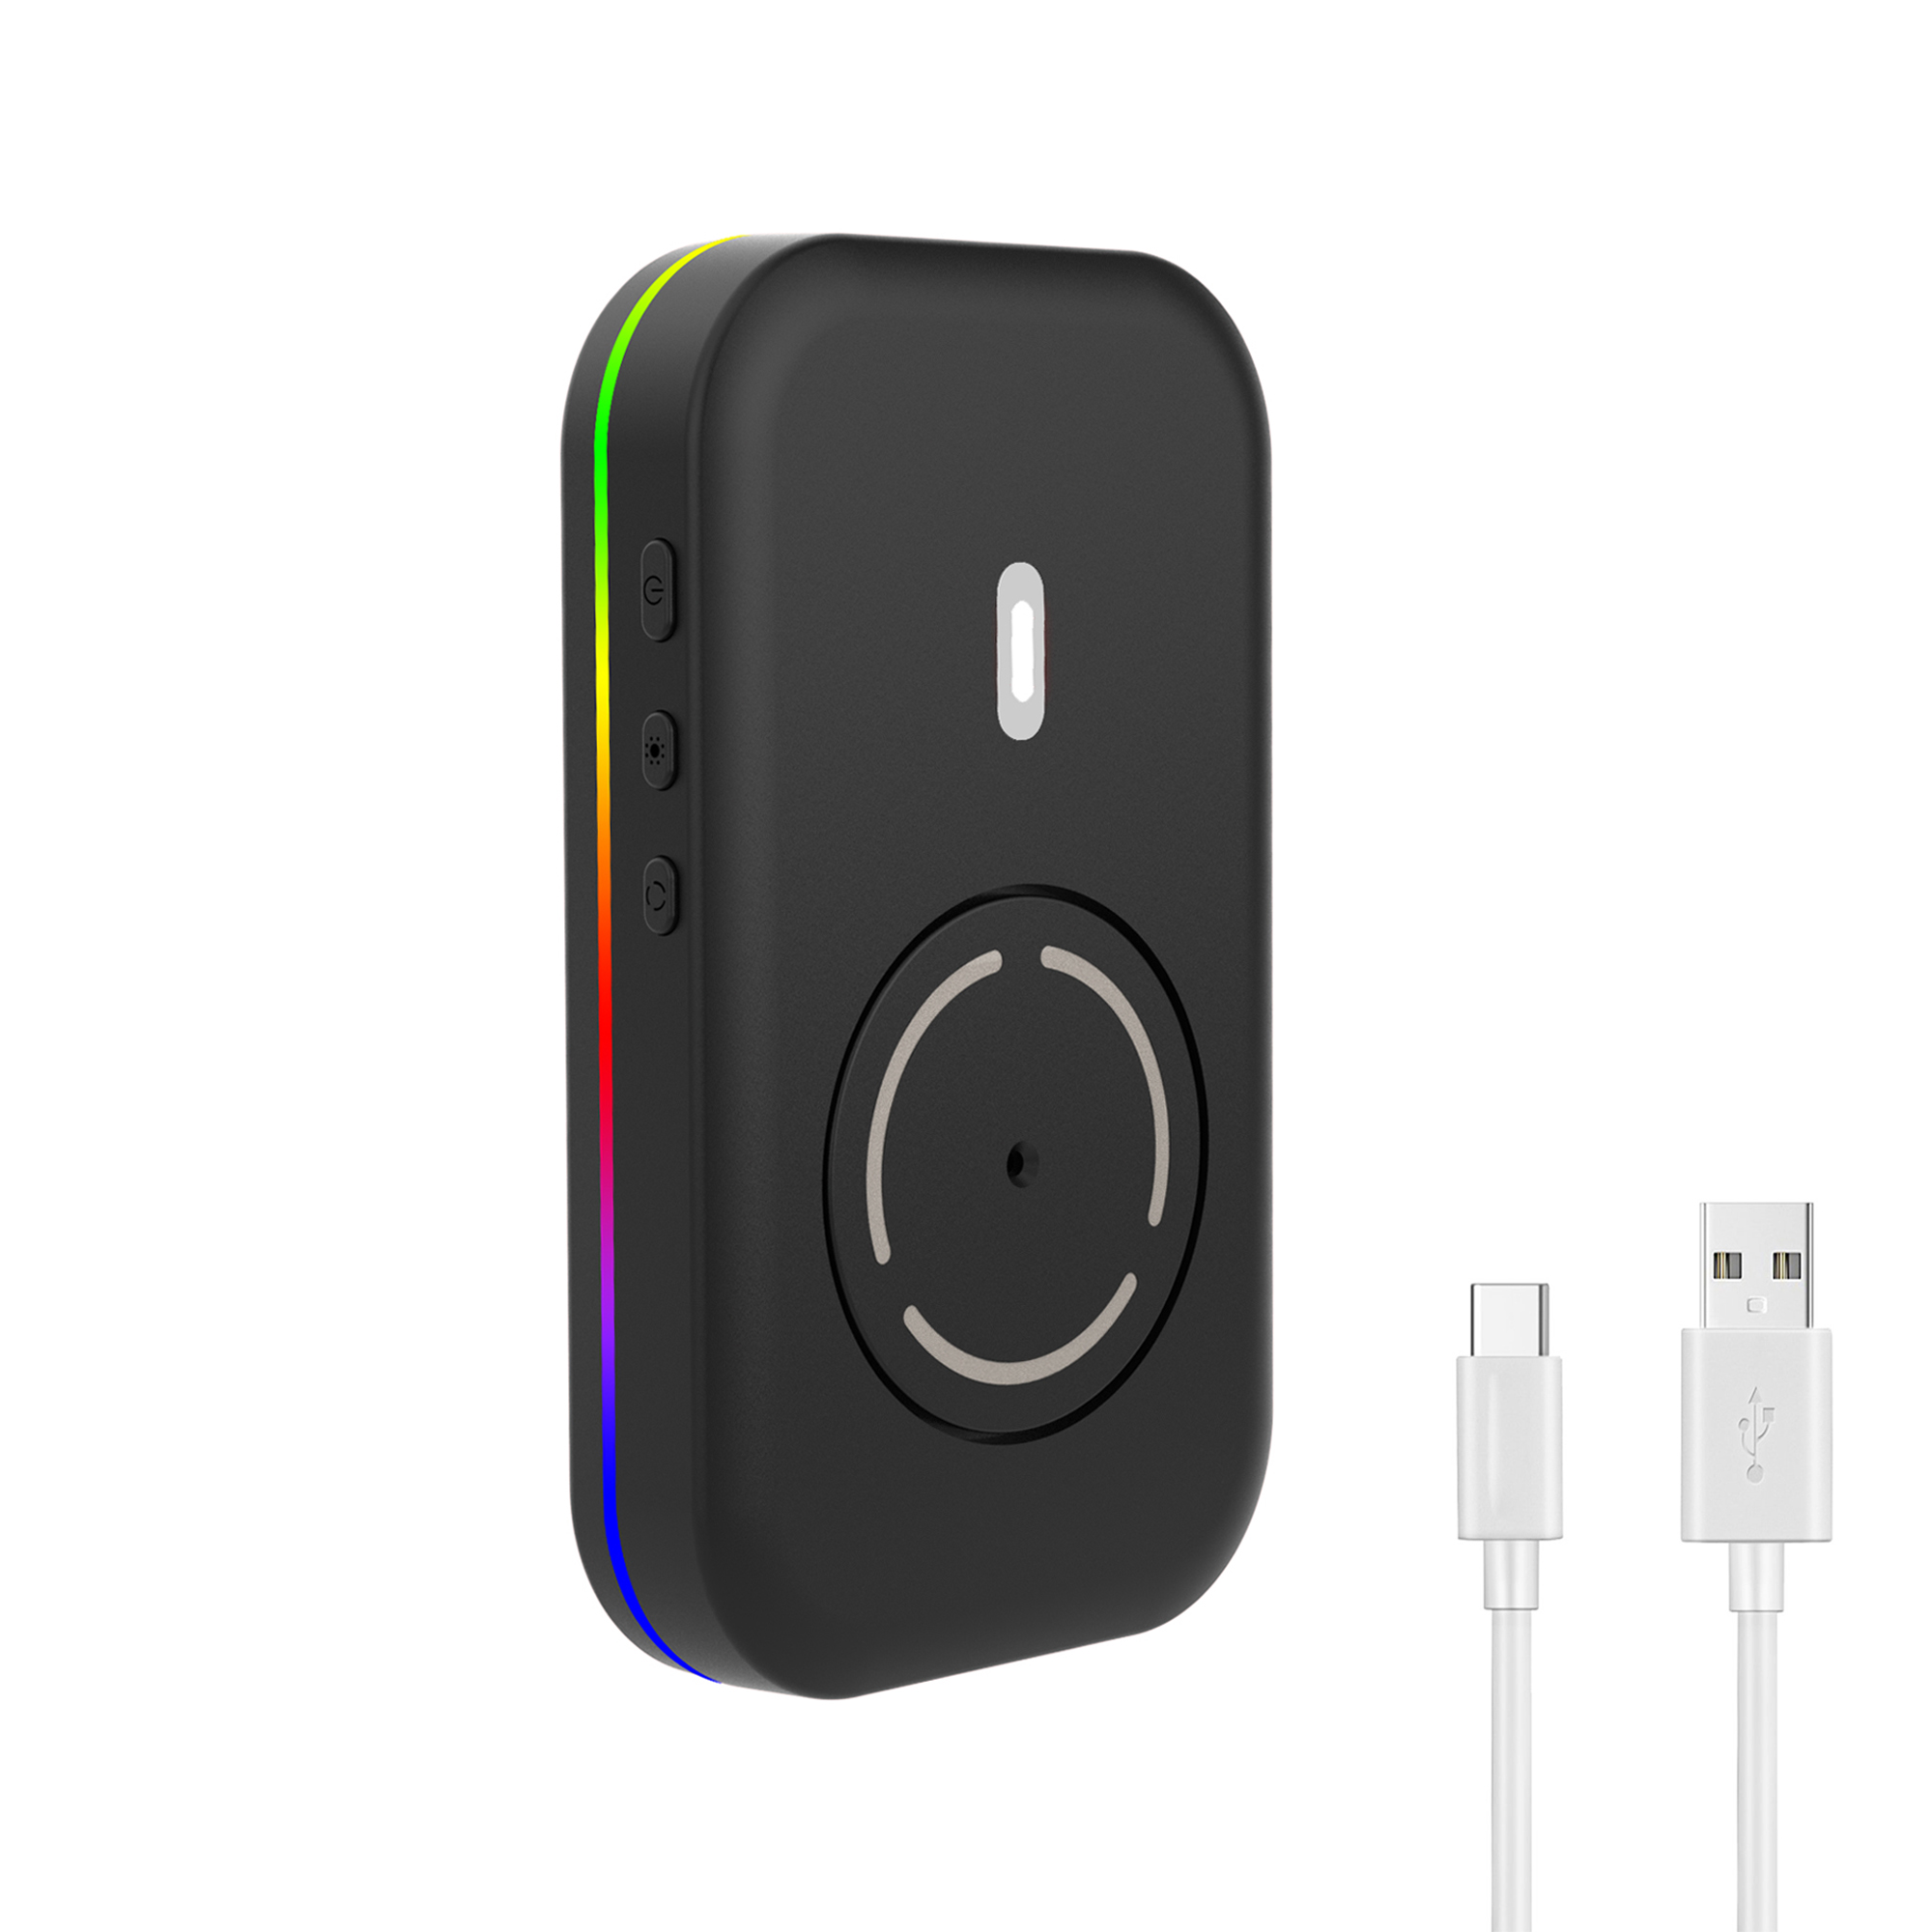 Mouse Mover, 100% Undetectable Jiggler Pad Moves Randomly RGB ON/Off Time Adjustable USB-C Automatic